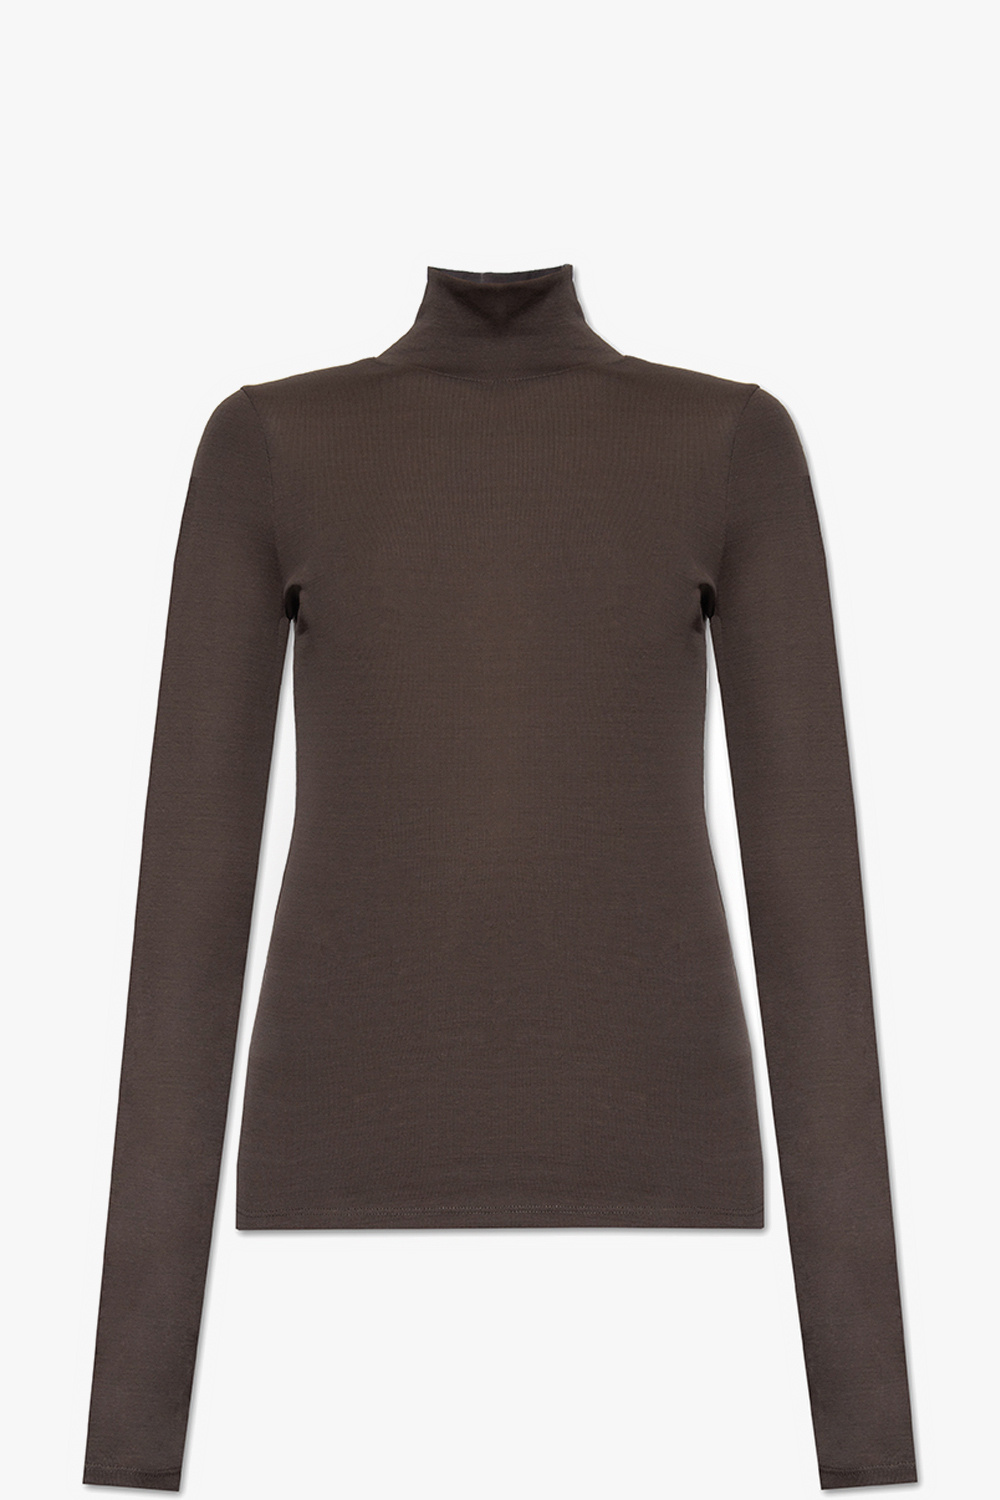 Lemaire buy only detailed sleeve sweatshirt